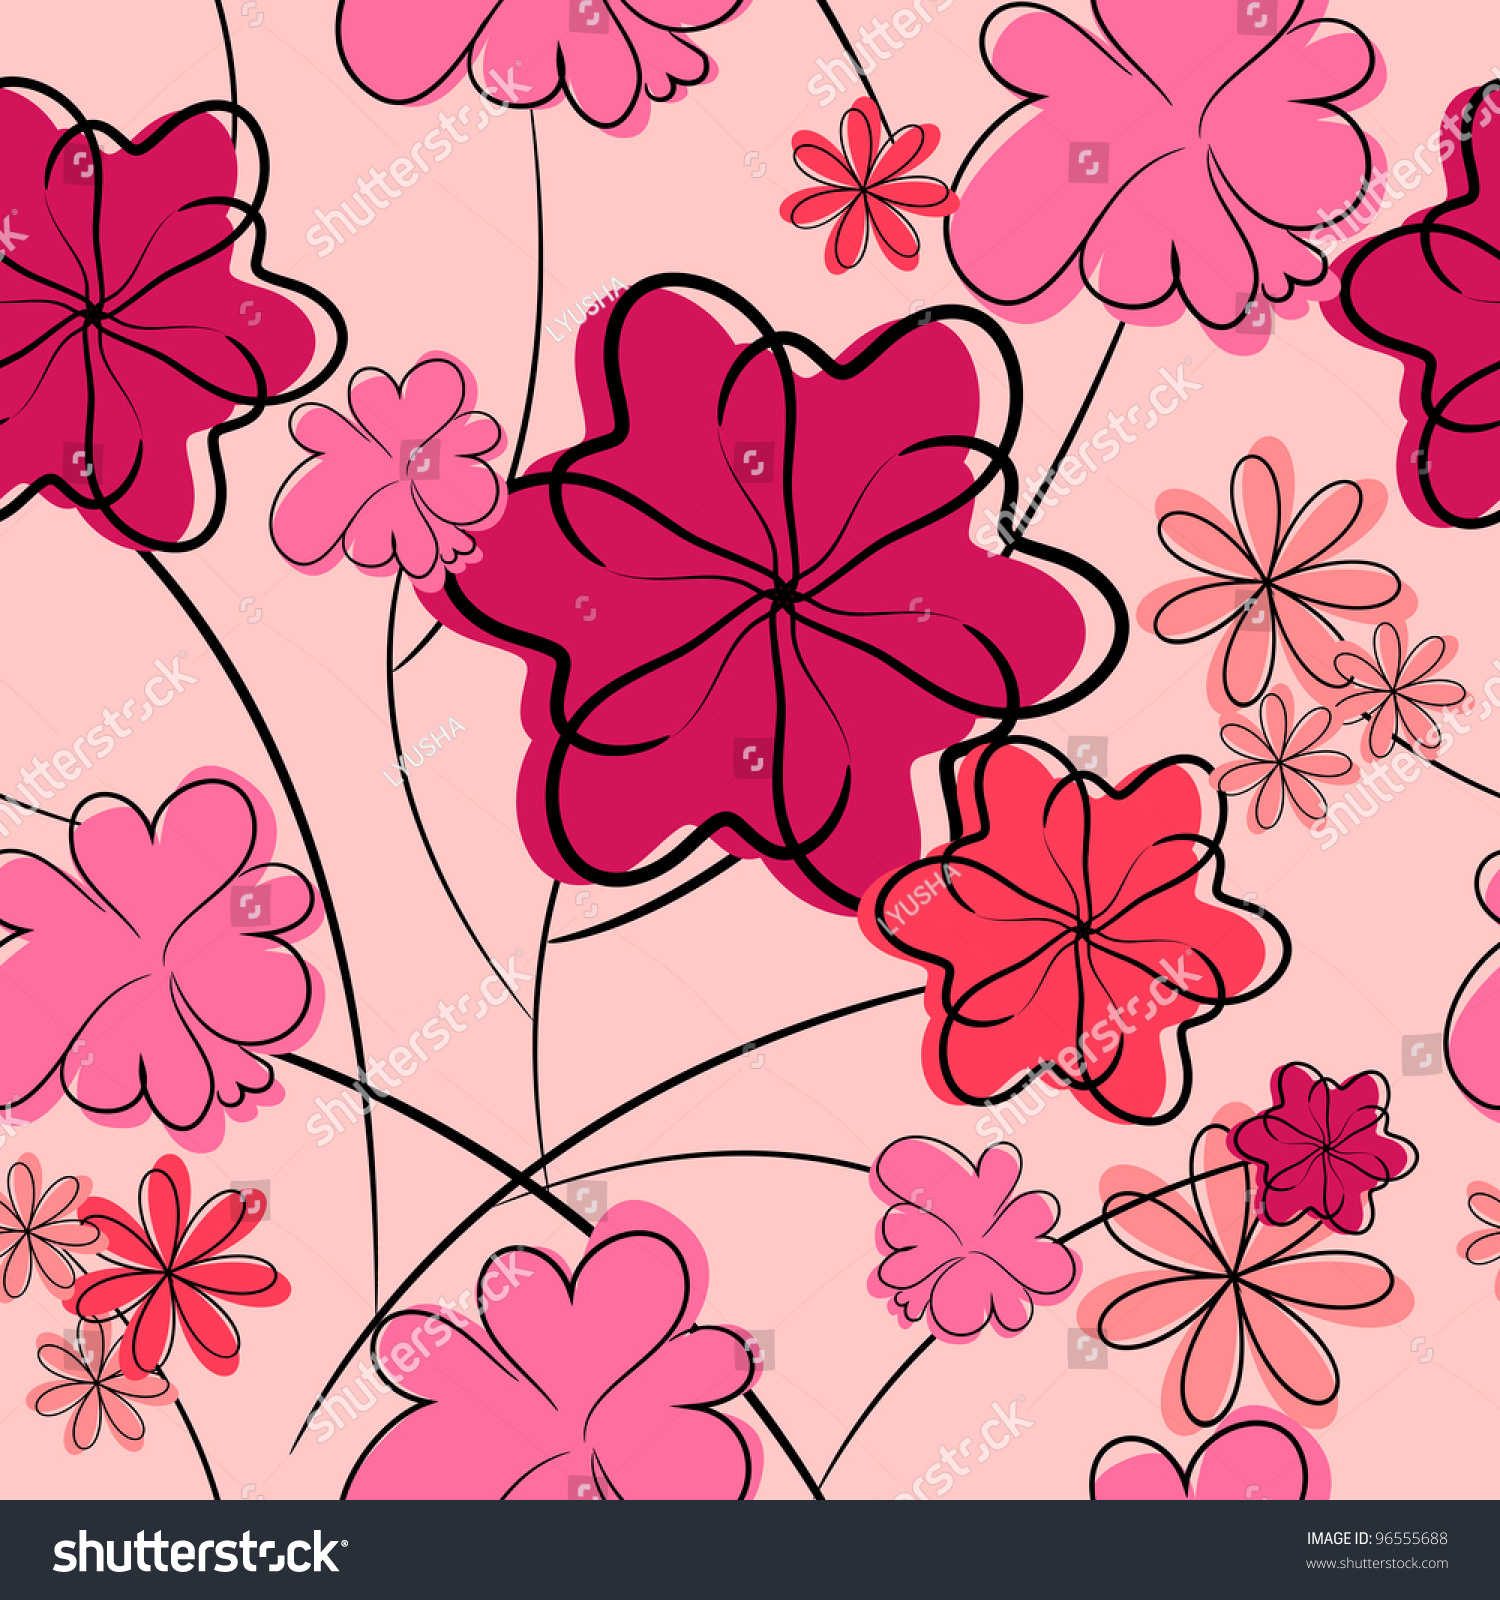 Flower Seamless Texture. Floral Background Stock Vector Illustration